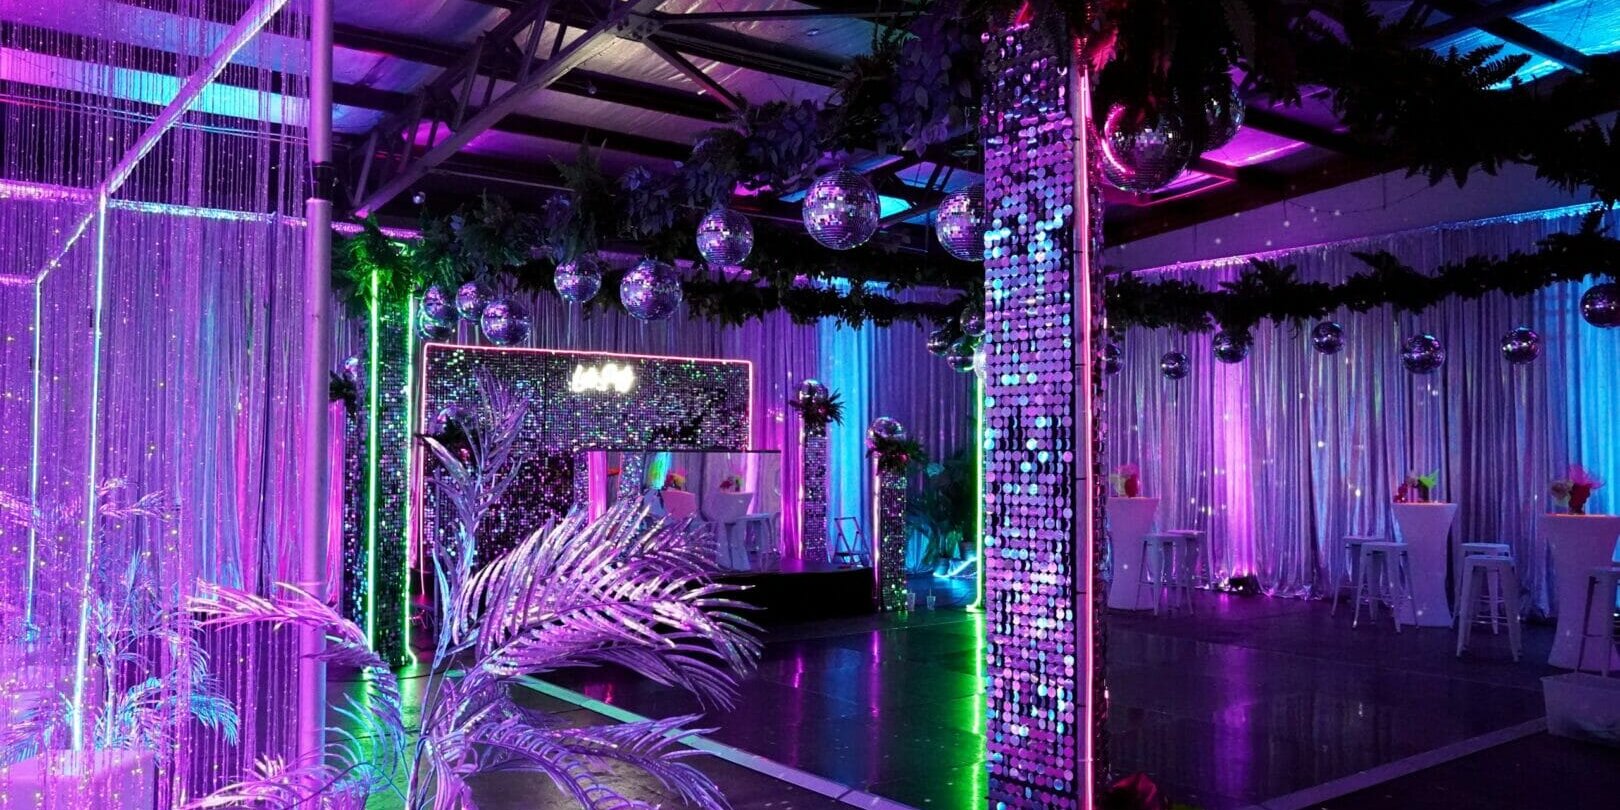 dance floor, mirror ball, sequin panels, greenery at neon disco themed party